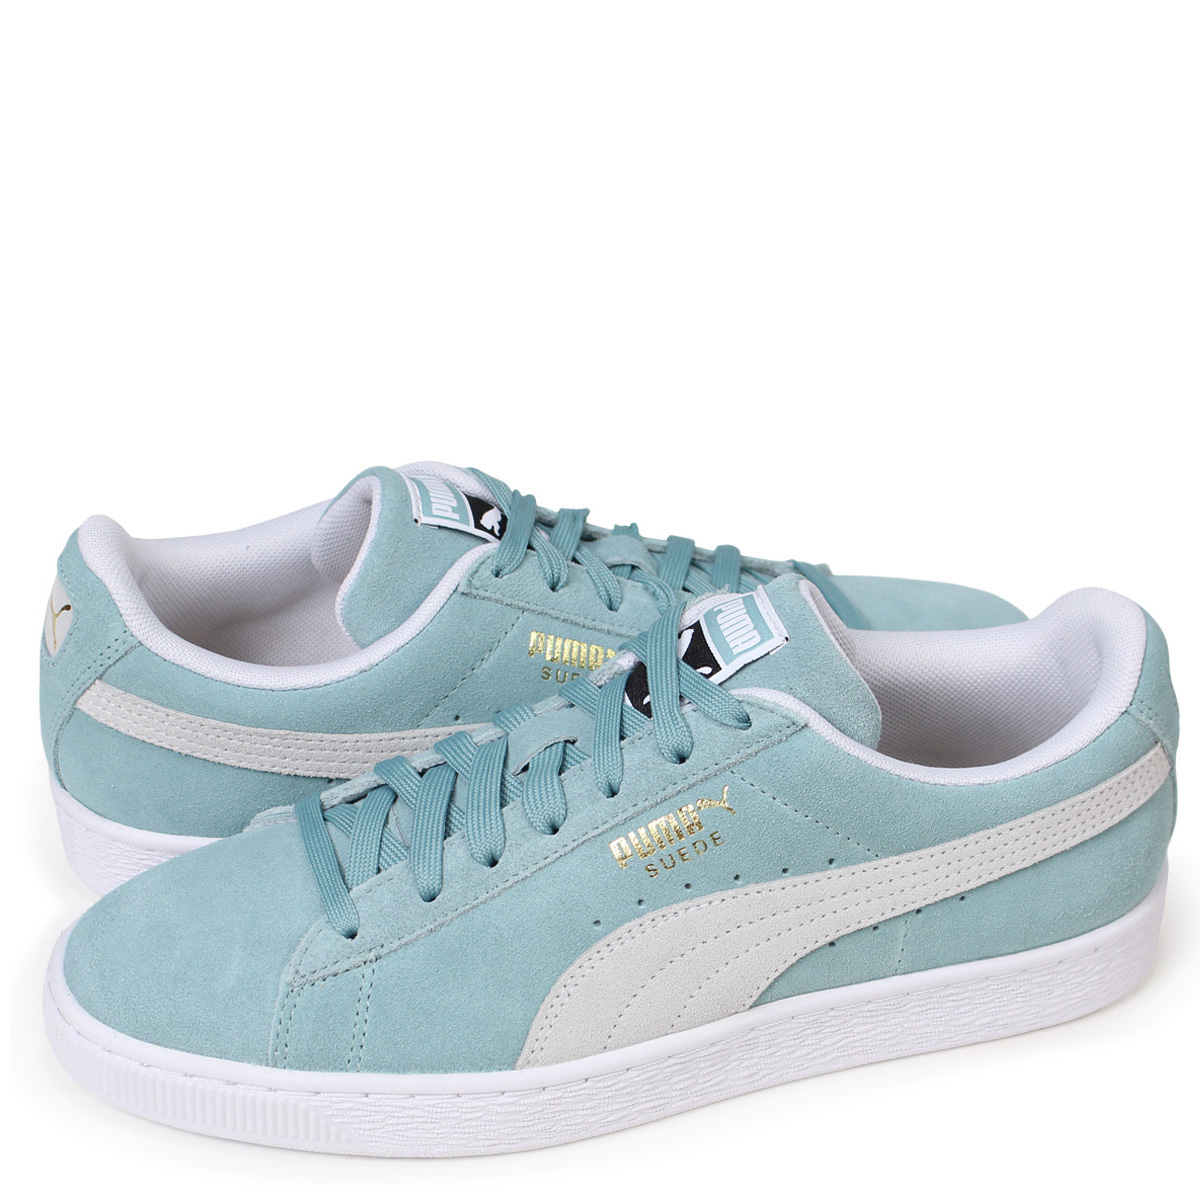 suede turquoise pumas